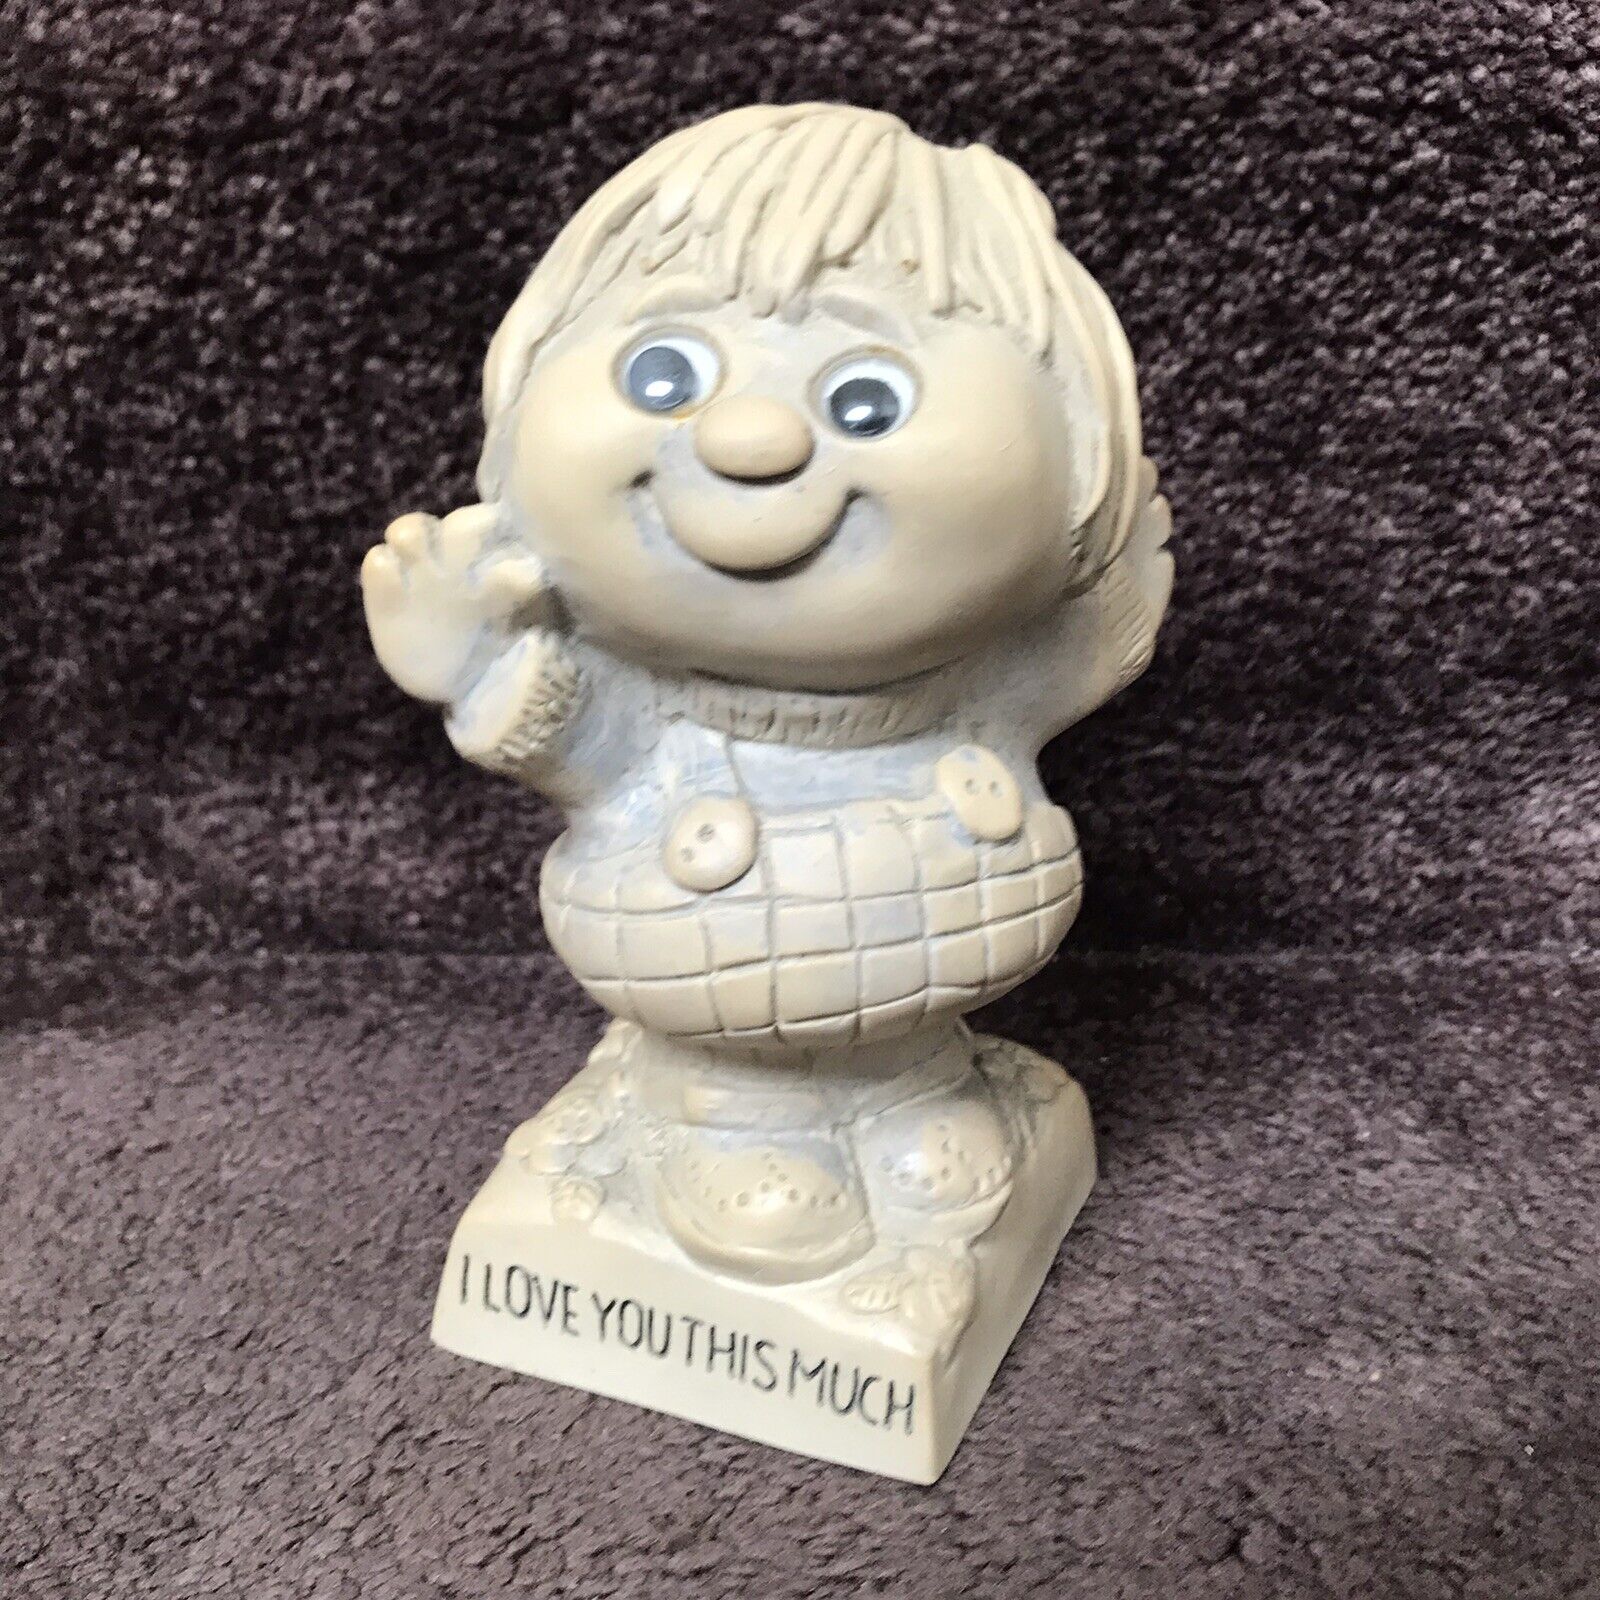 Vintage 1970s Googly Eyes Figurine I Love You This Much  American Greetings Corp